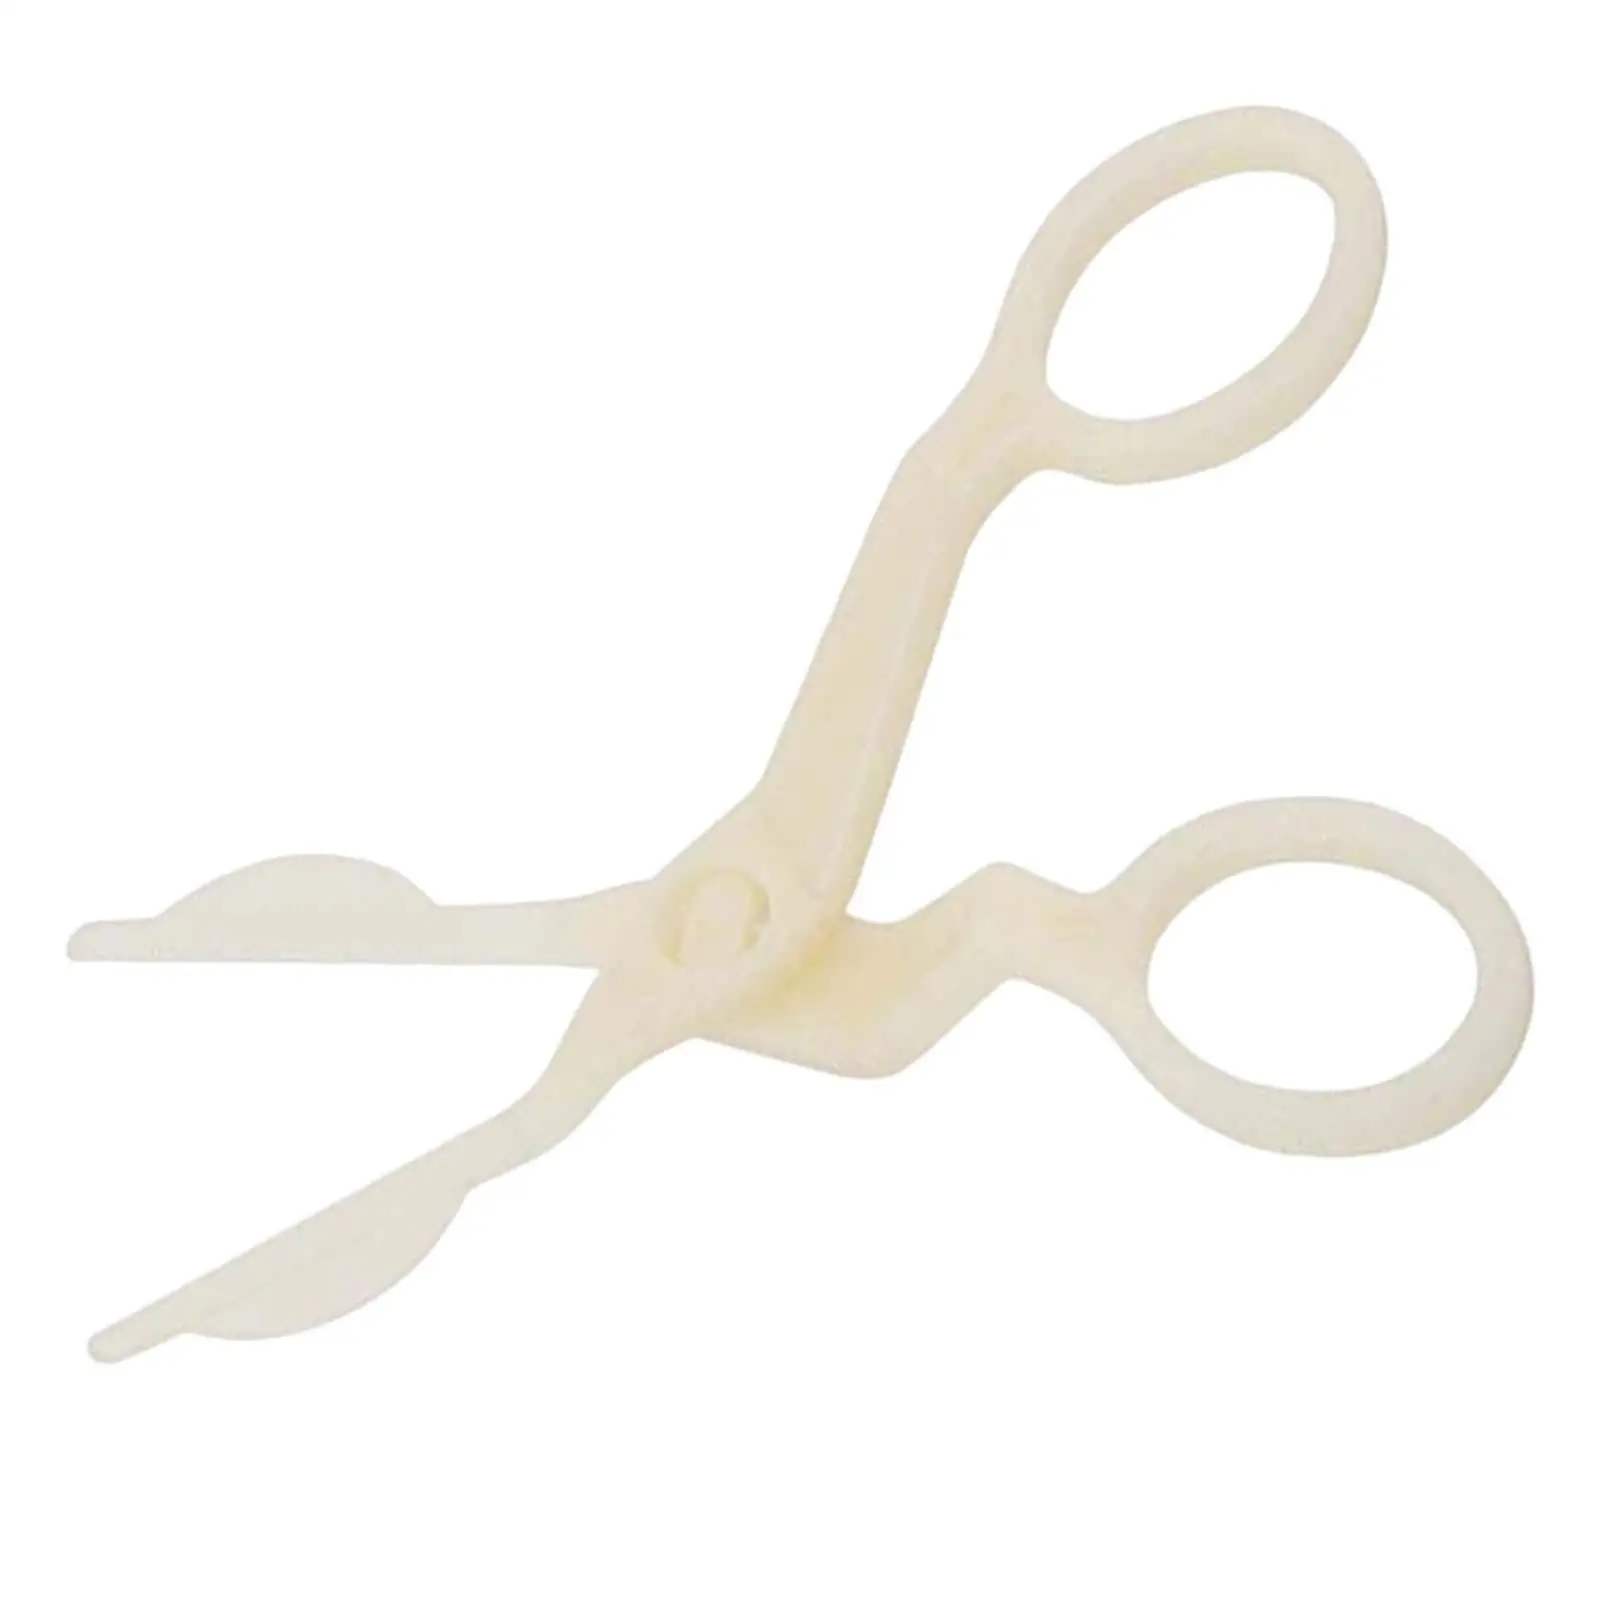 Piping Flower Scissor Decorative Accs Candy Sculpting Tools Display Plate Flower Nail for Cake Icing Frosting Pastries Baking